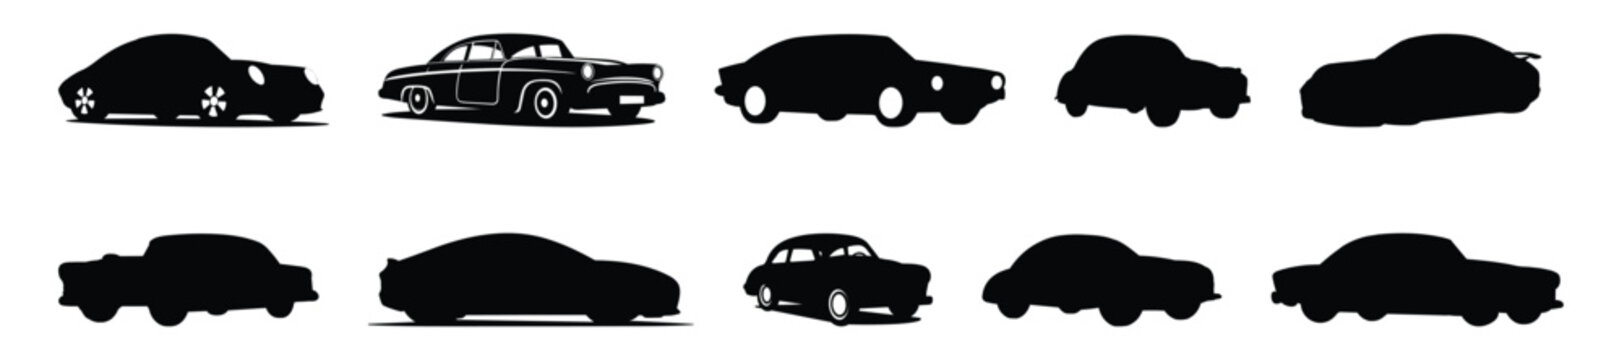 Retro car silhouettes set, large pack of vector silhouette design, isolated white background